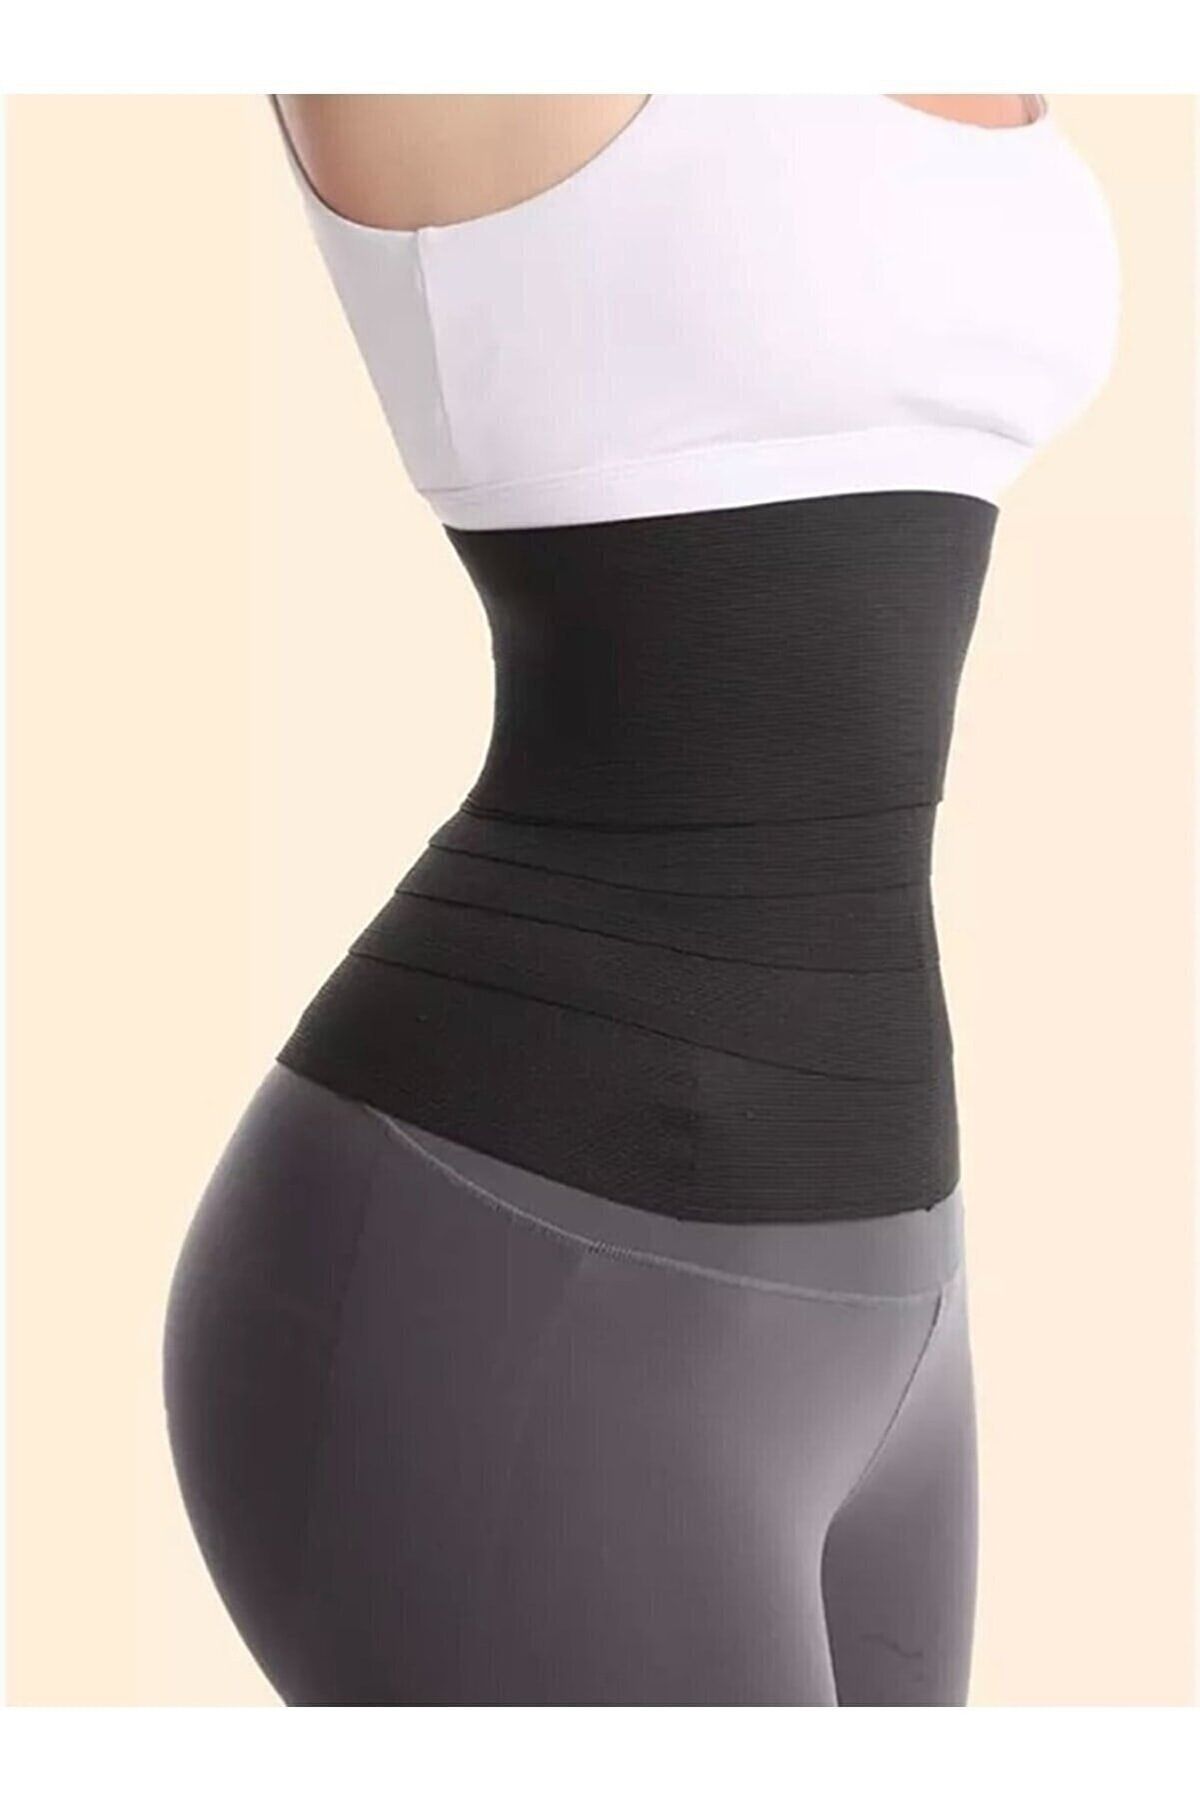 SAUNA SUIT Latex Waist Corset Slimming Firming Hourglass Appearance Wrapped  Waist Corset - Trendyol